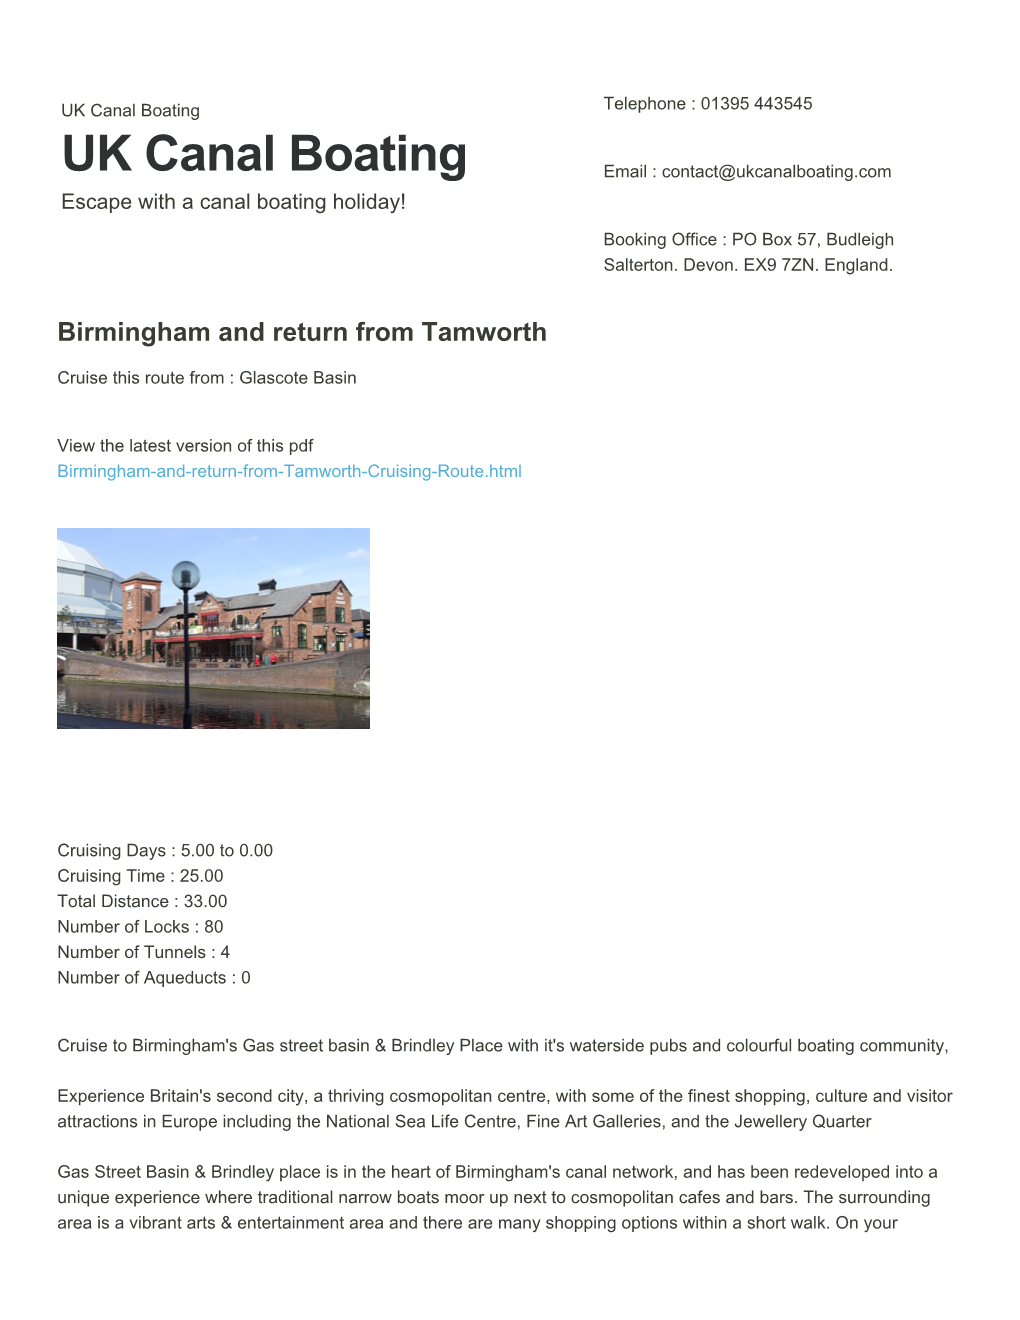 Birmingham and Return from Tamworth | UK Canal Boating